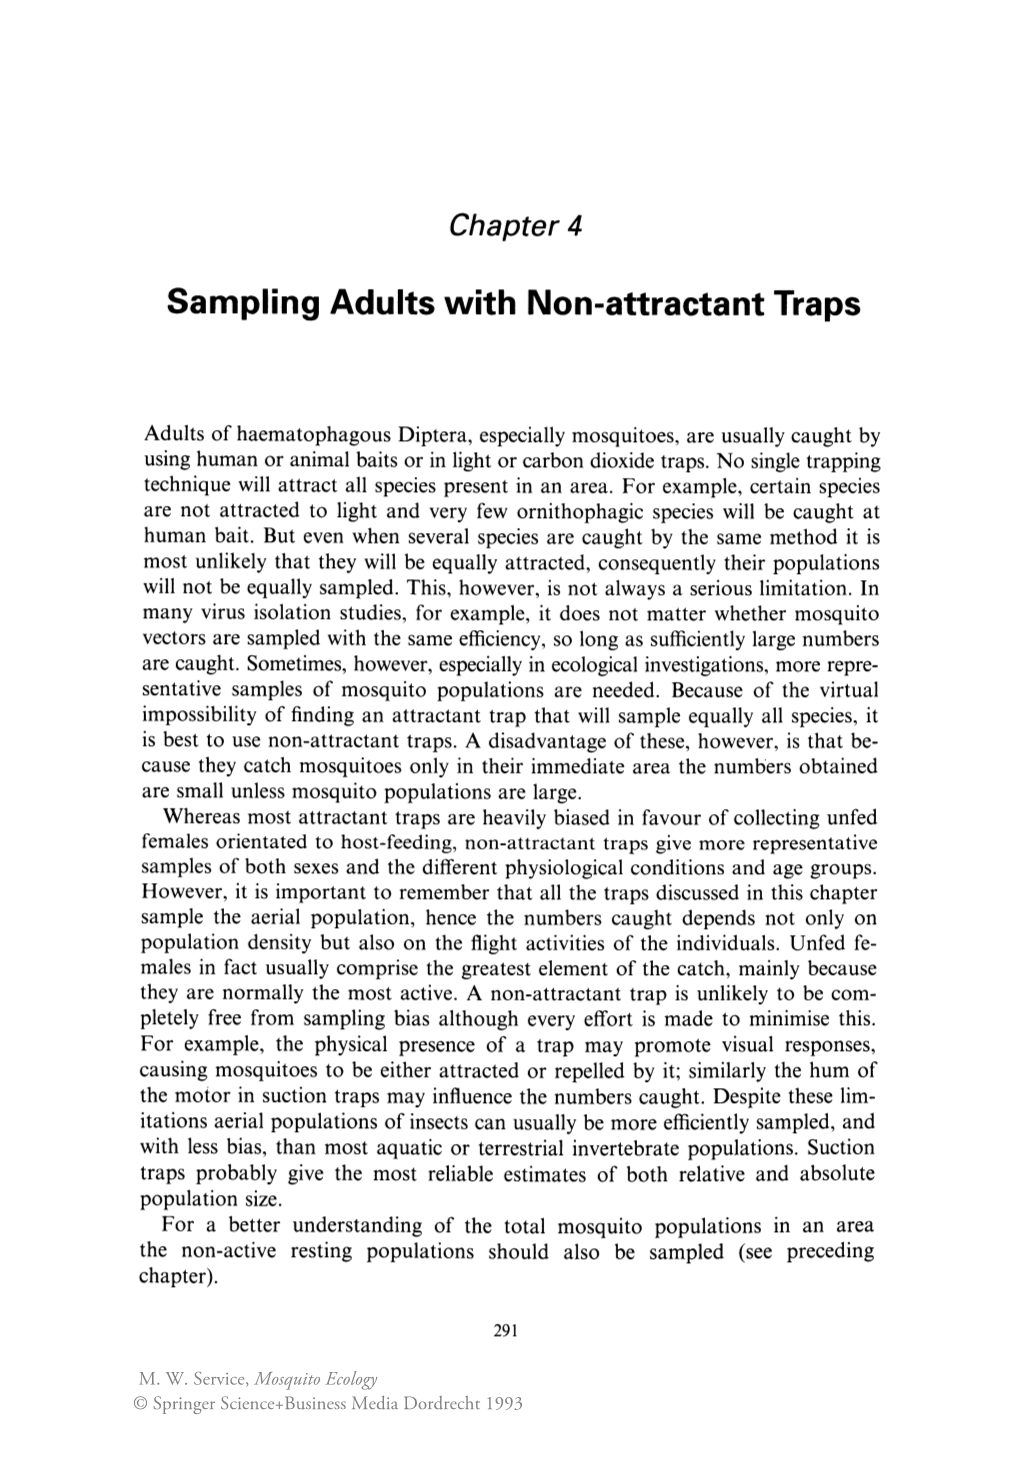 Sampling Adults with Non-Attractant Traps